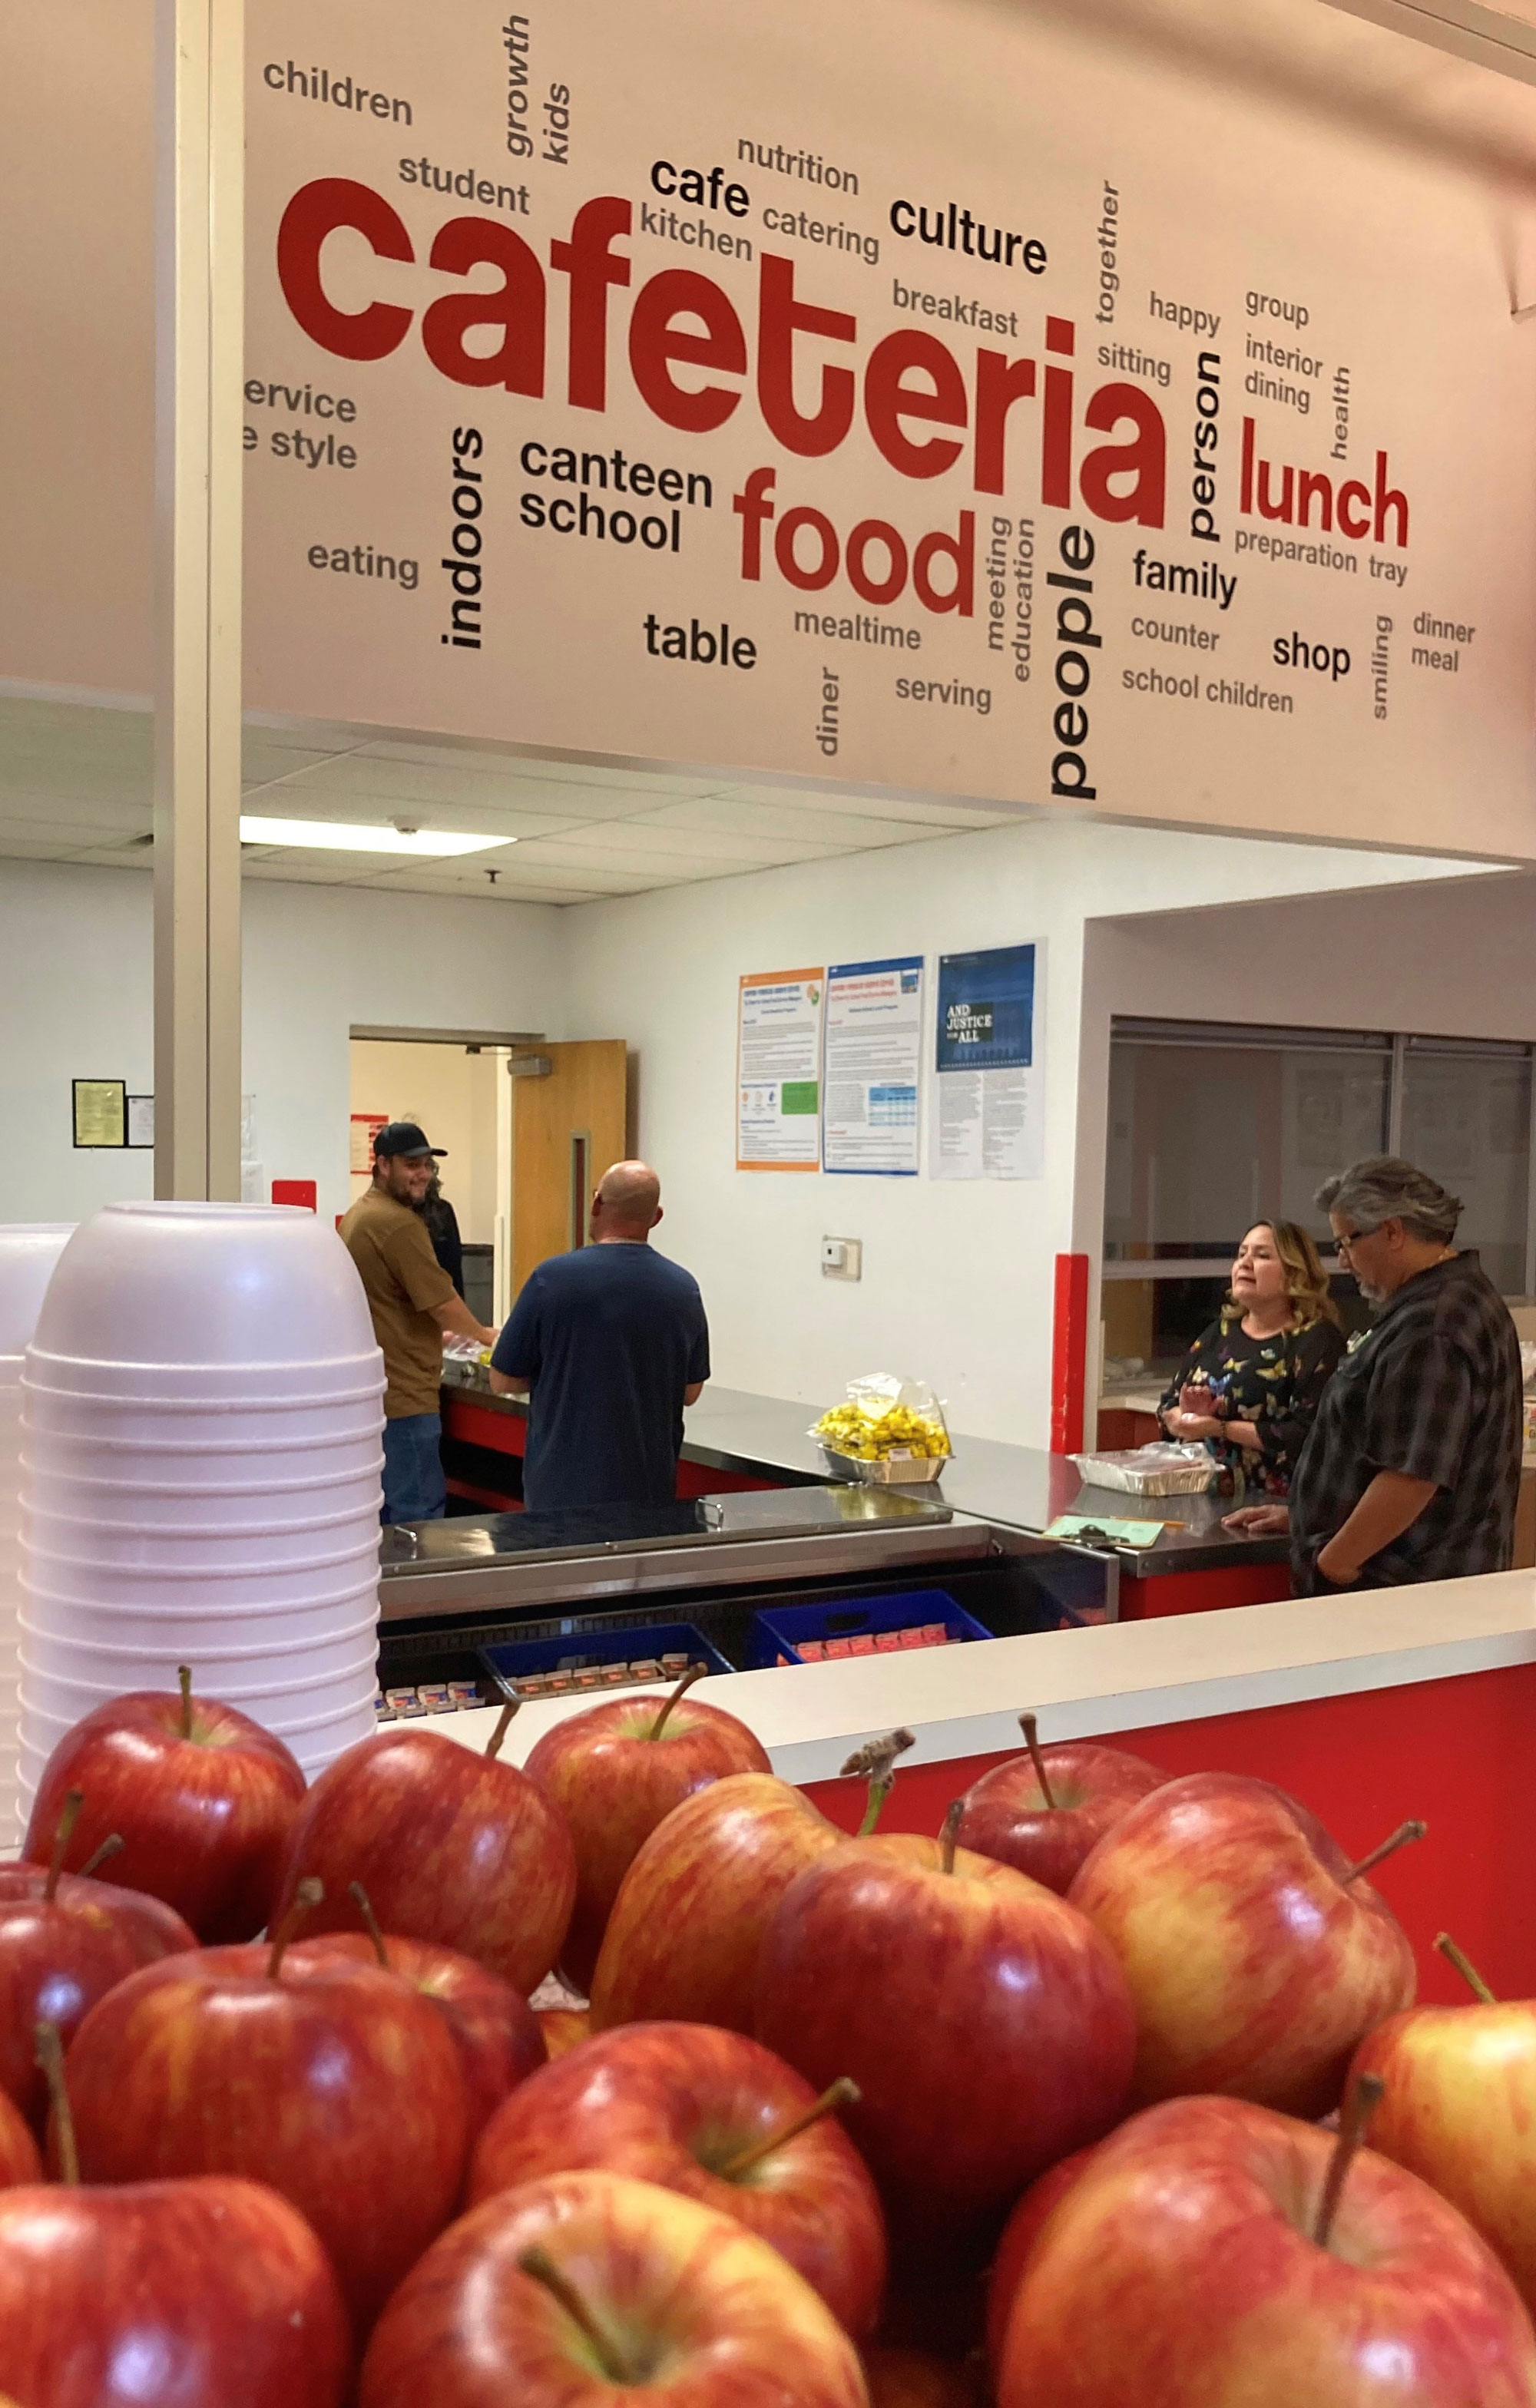 People visit a school cafeteria during lunch